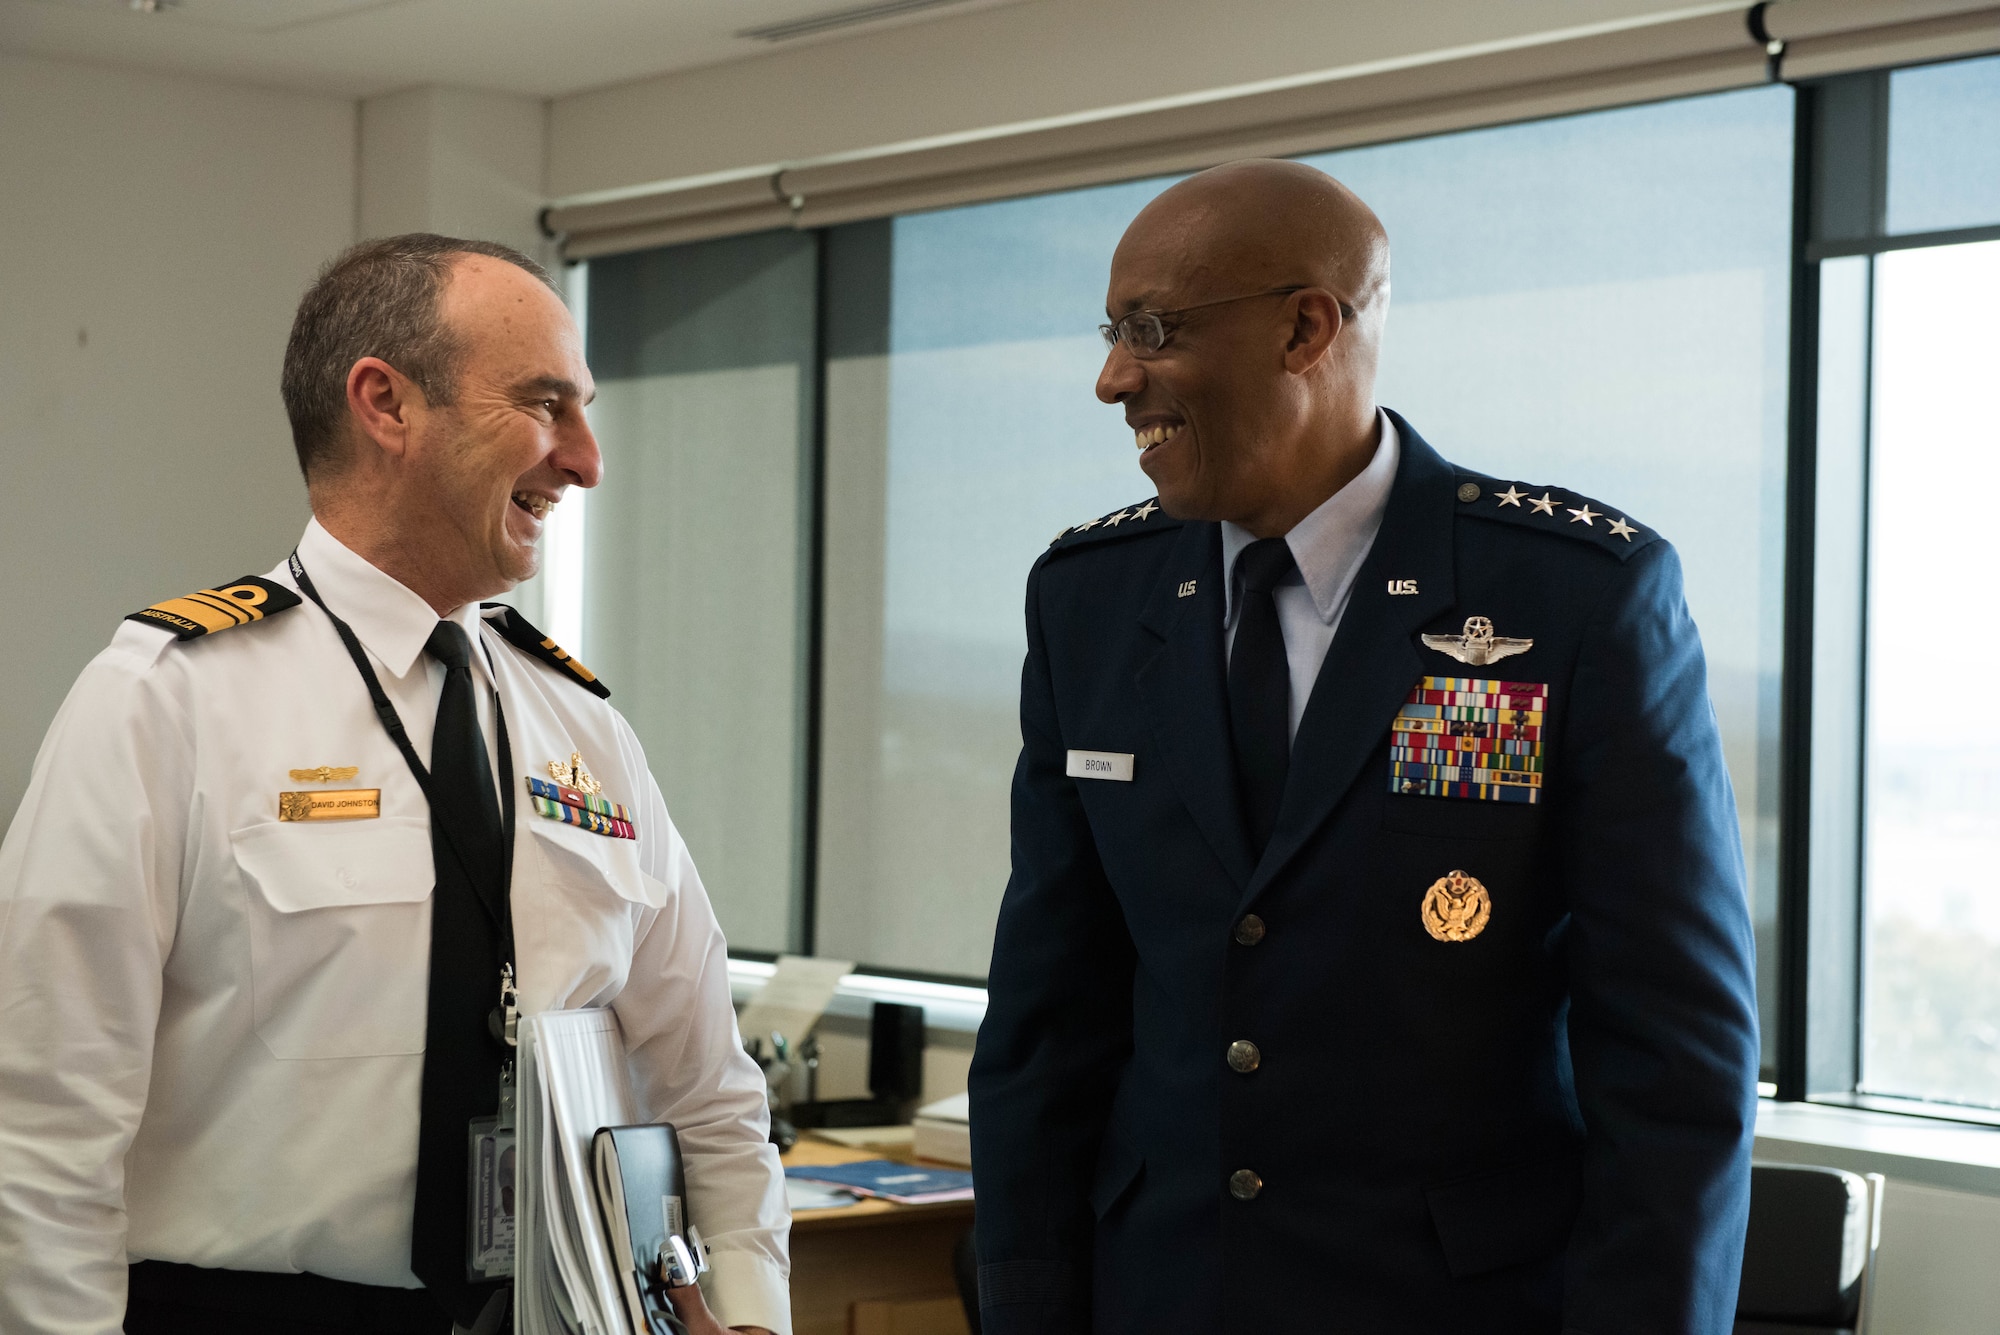 Gen. CQ Brown, Jr., Pacific Air Forces commander, attends an office call with Vice Admiral David Johnston, Australian Defense Force vice chief, at the Russell offices, Canberra, Australia, Aug. 10, 2018. His first trip to the region since taking command on July 26, 2018, Brown met with key defense and military leaders in Canberra and Royal Australian Air Force Bases Williamtown, Tindal and Darwin to see first-hand the strength of the U.S.-Australia alliance and discuss opportunities to ensure a free and open Indo-Pacific region. (U.S. Air Force photo by Staff Sgt. Hailey Haux)